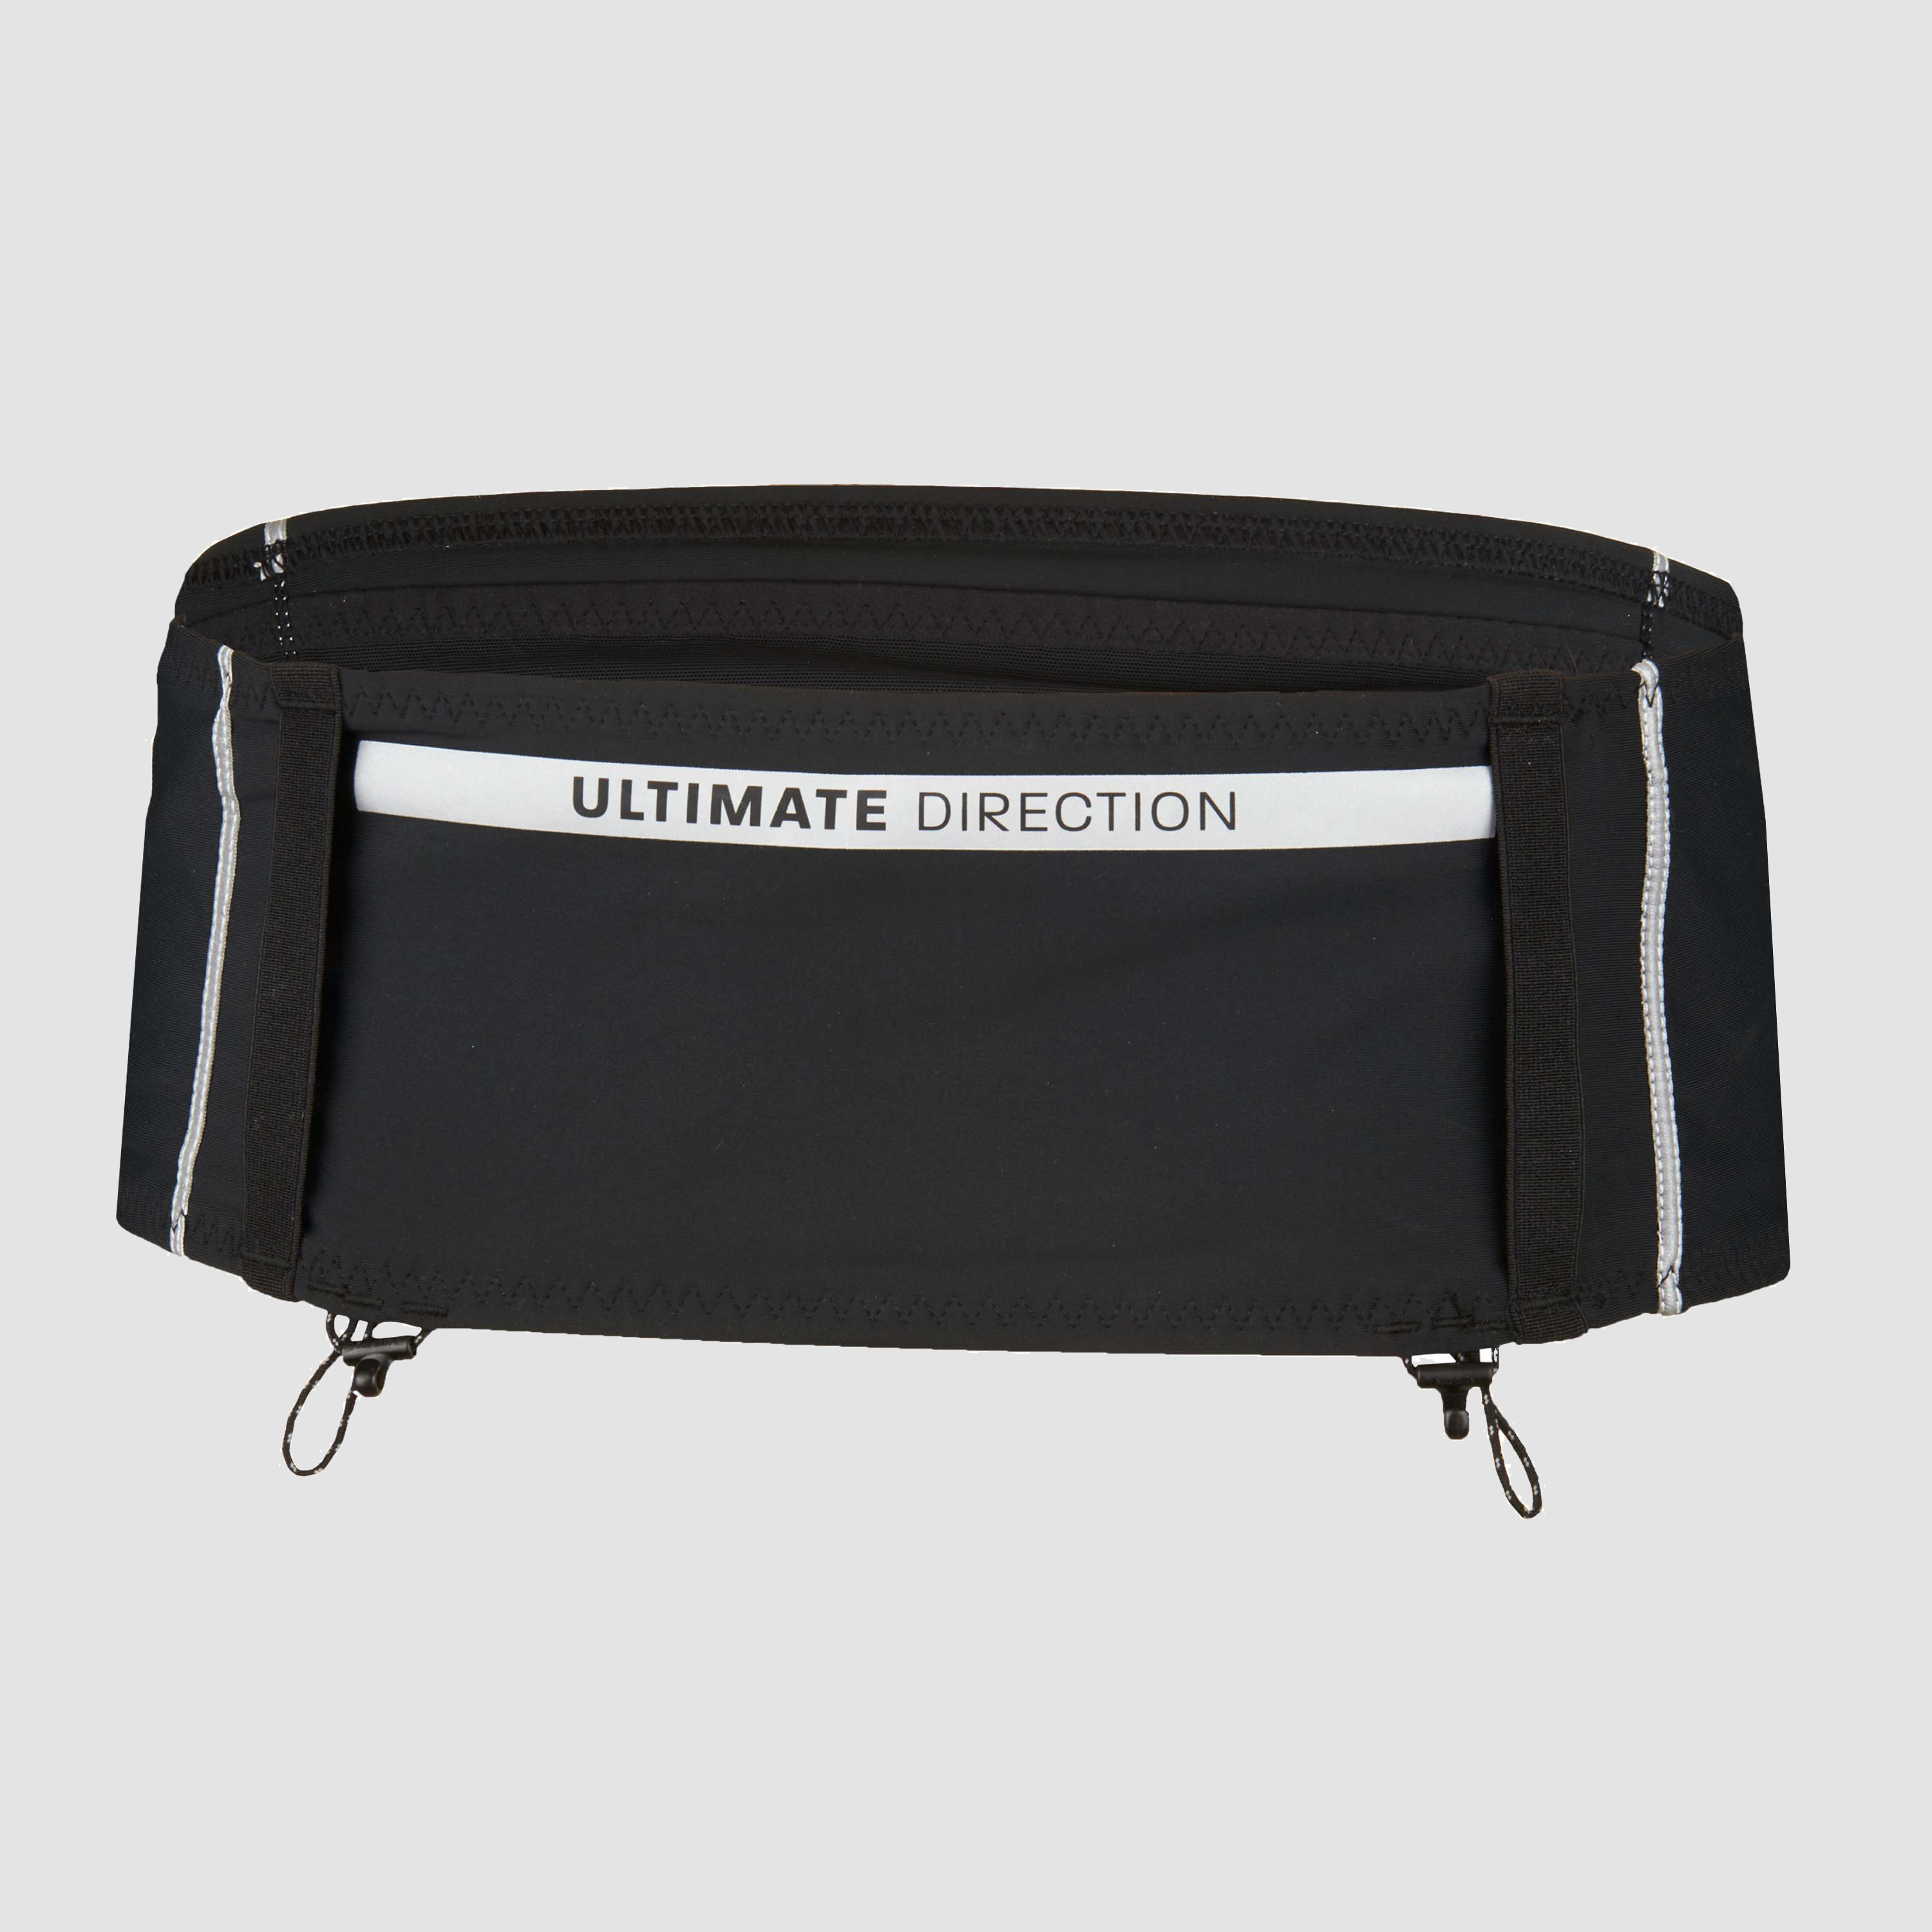 Ultimate Direction Comfort Belt in Onyx Size XL